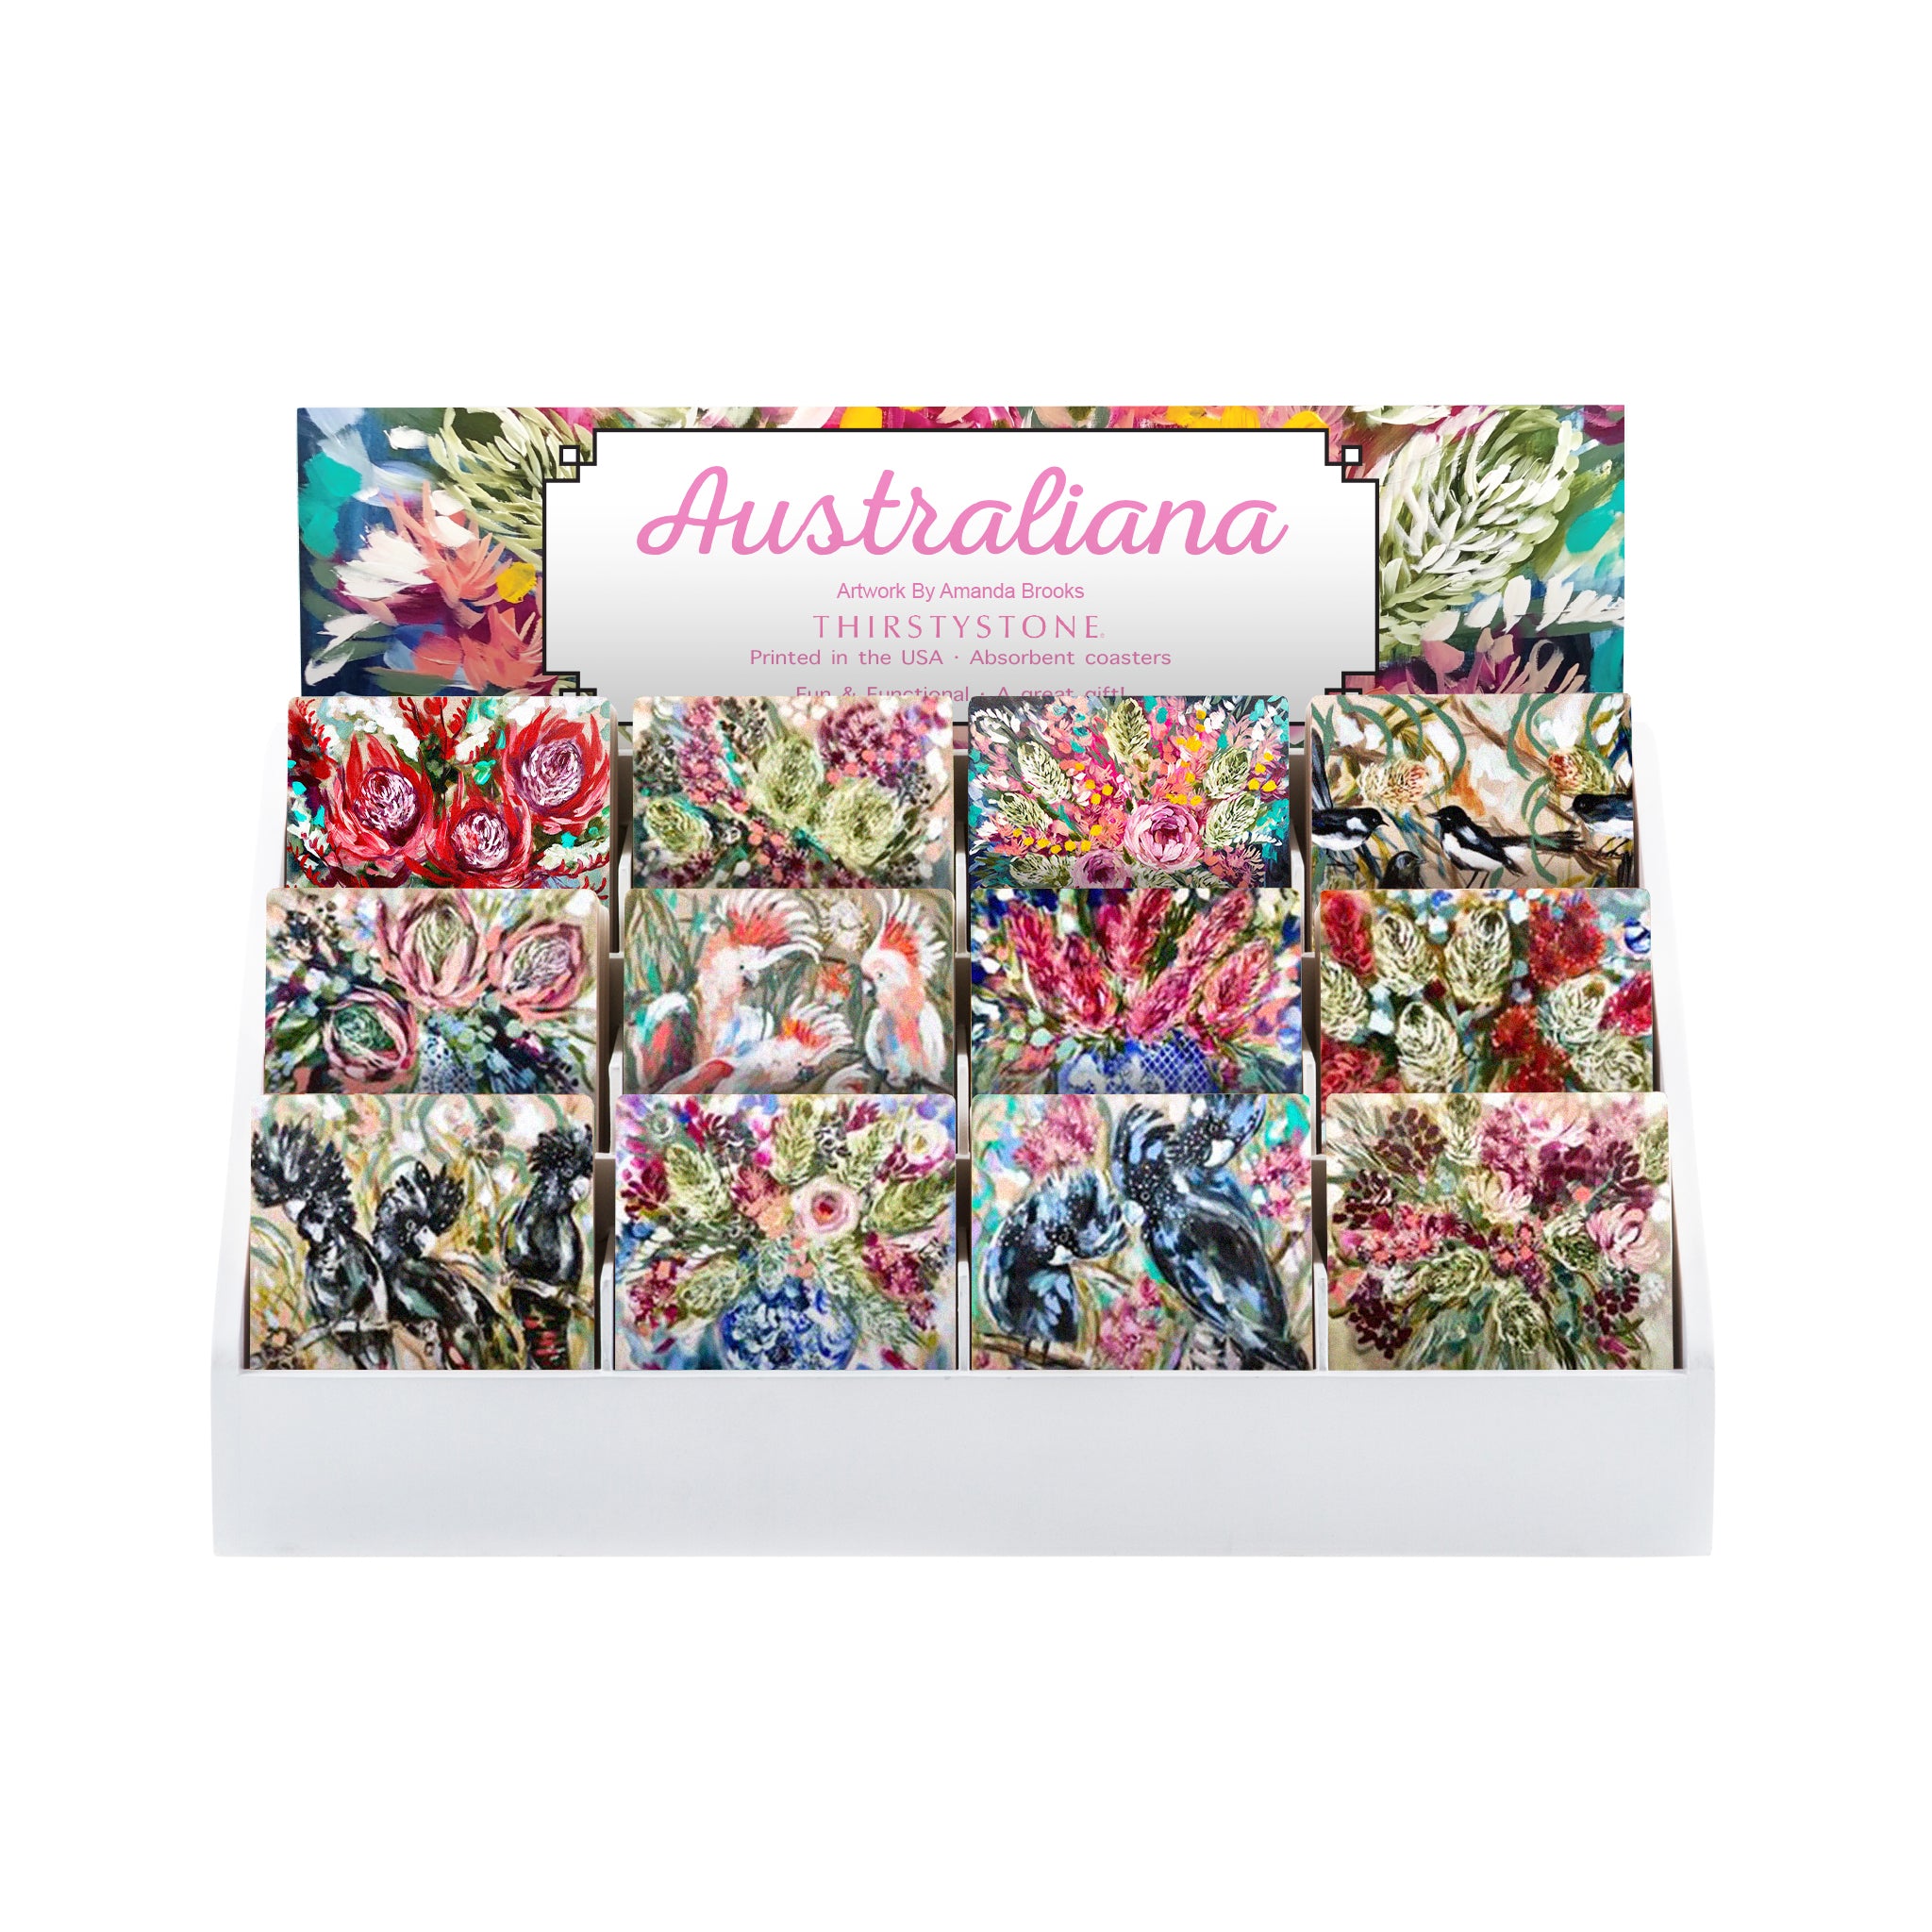 Australiana Florals by Amanda Brooks | Stone Drink Coaster Collection